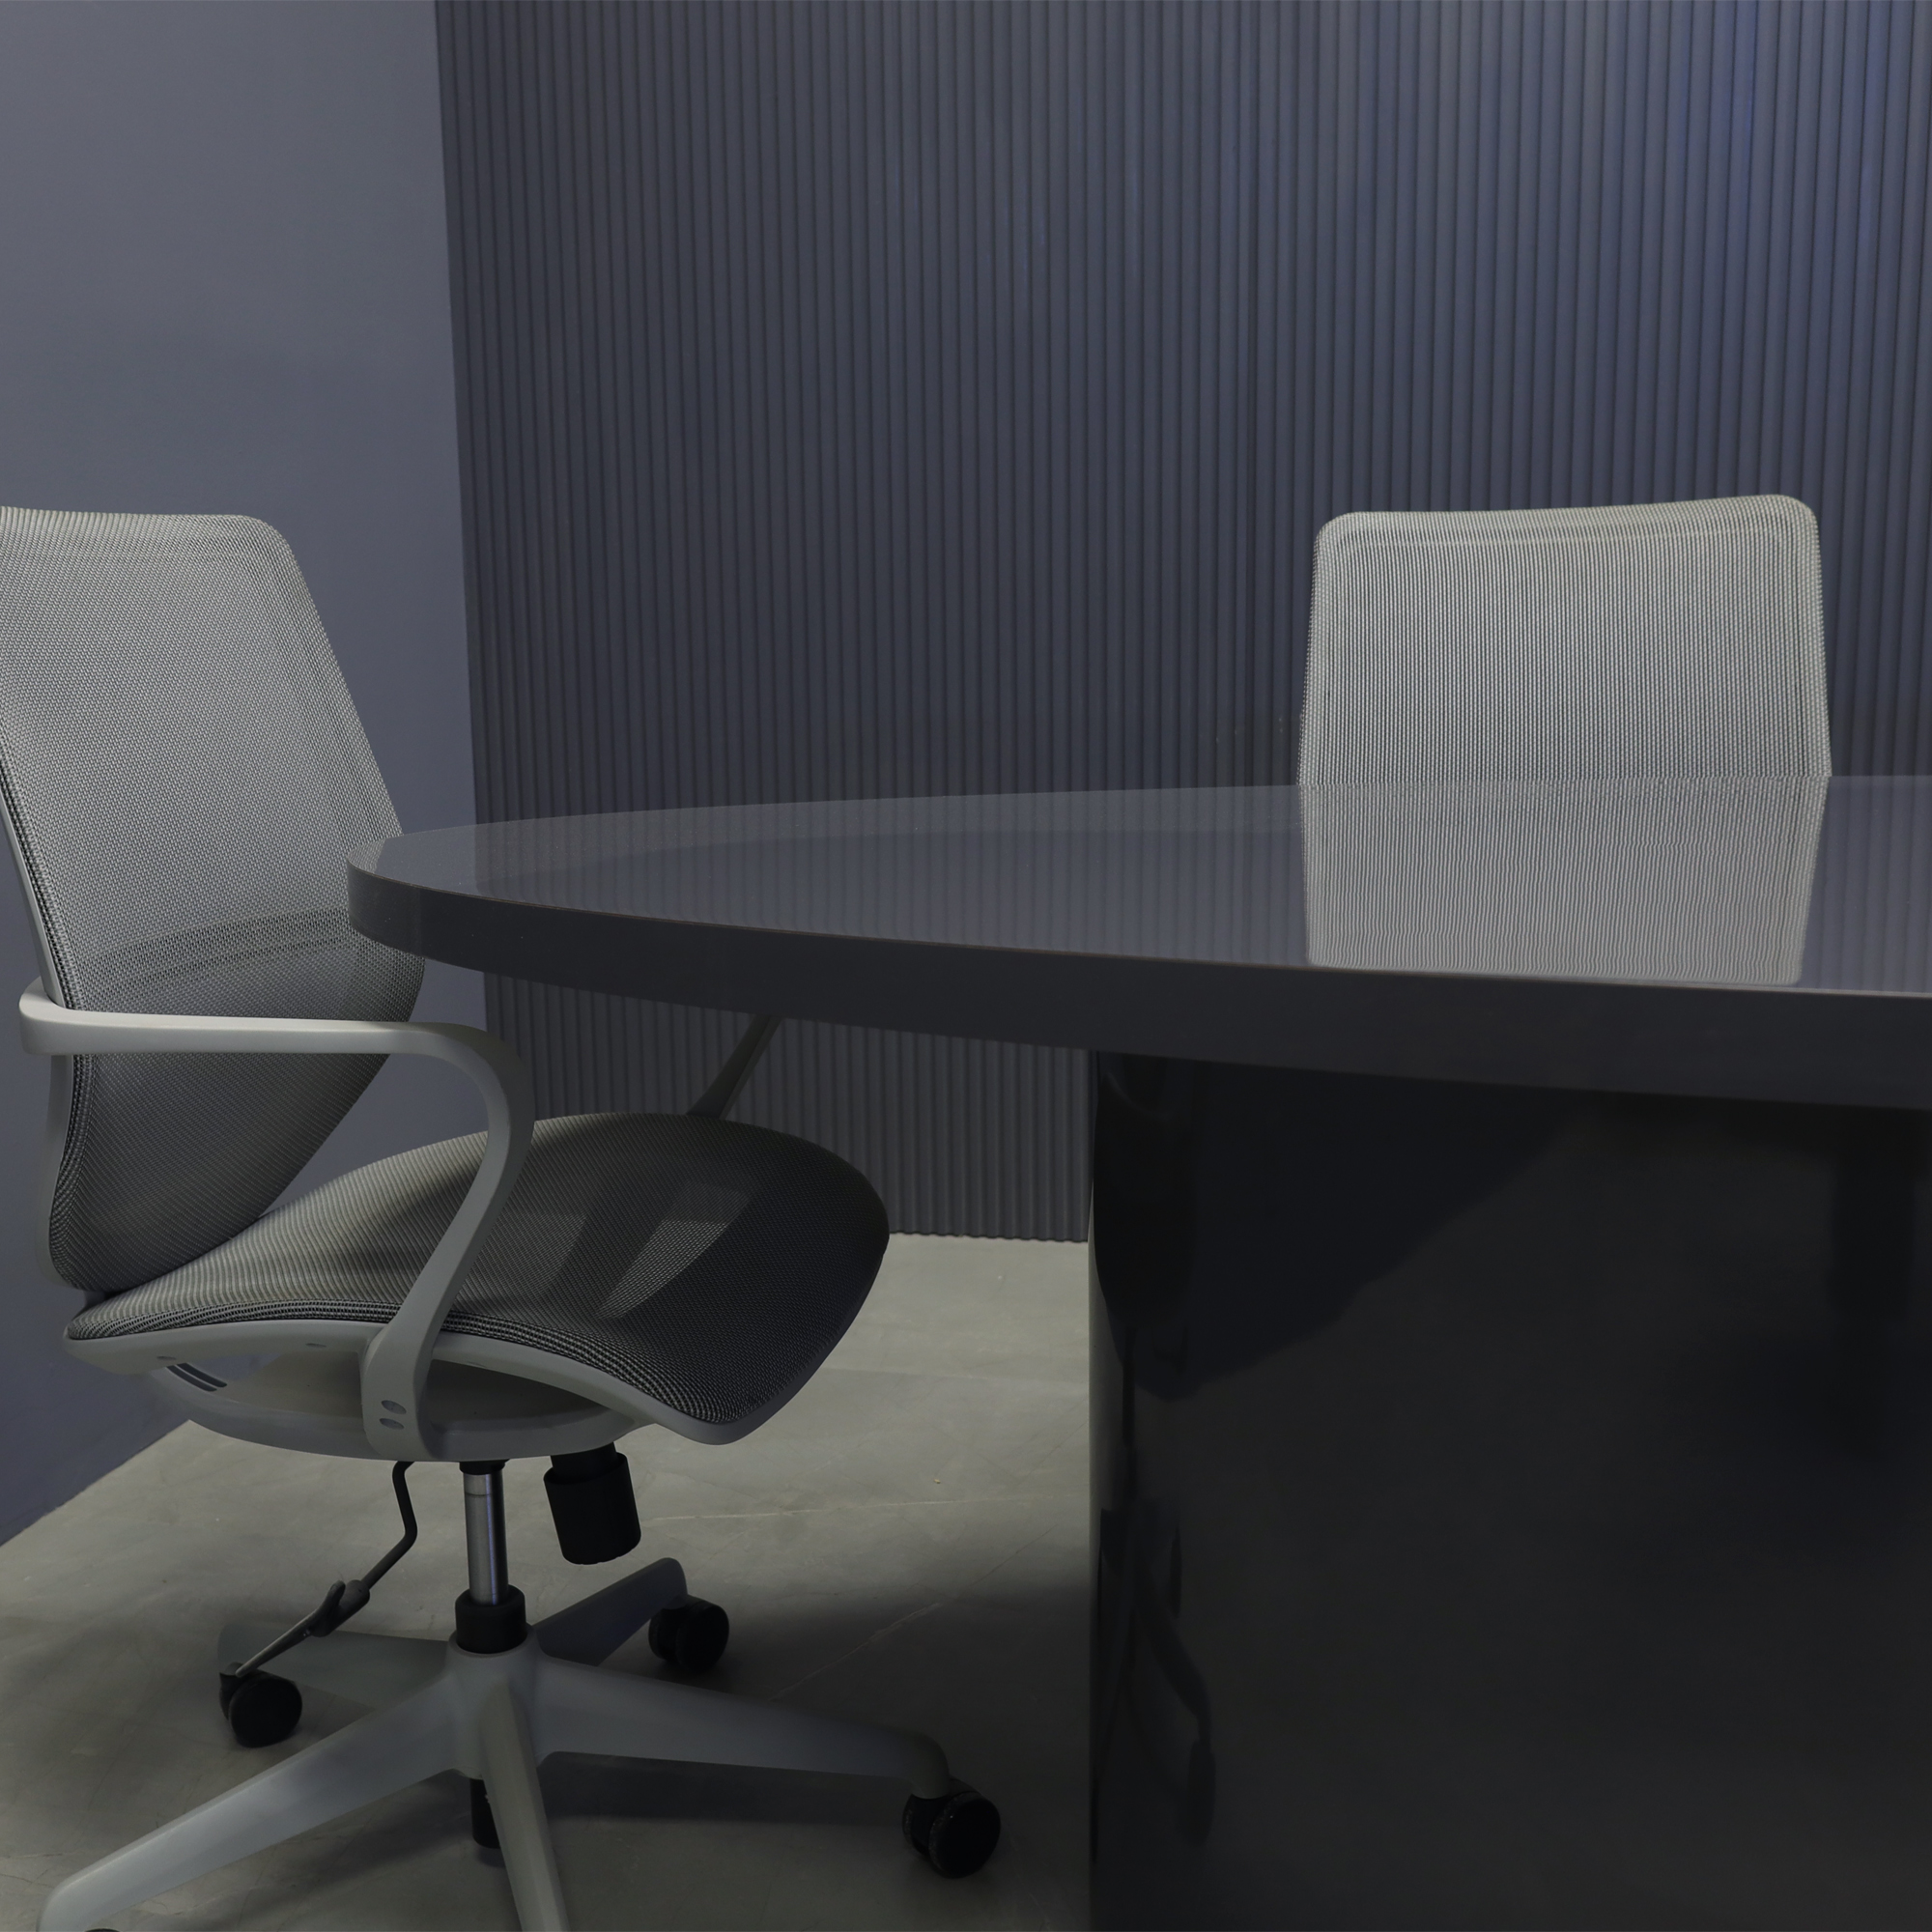 84-inch Newton Oval Conference Table With Laminate Top in storm gray gloss laminate top and base, with silver MX3 powerbox, shown here.